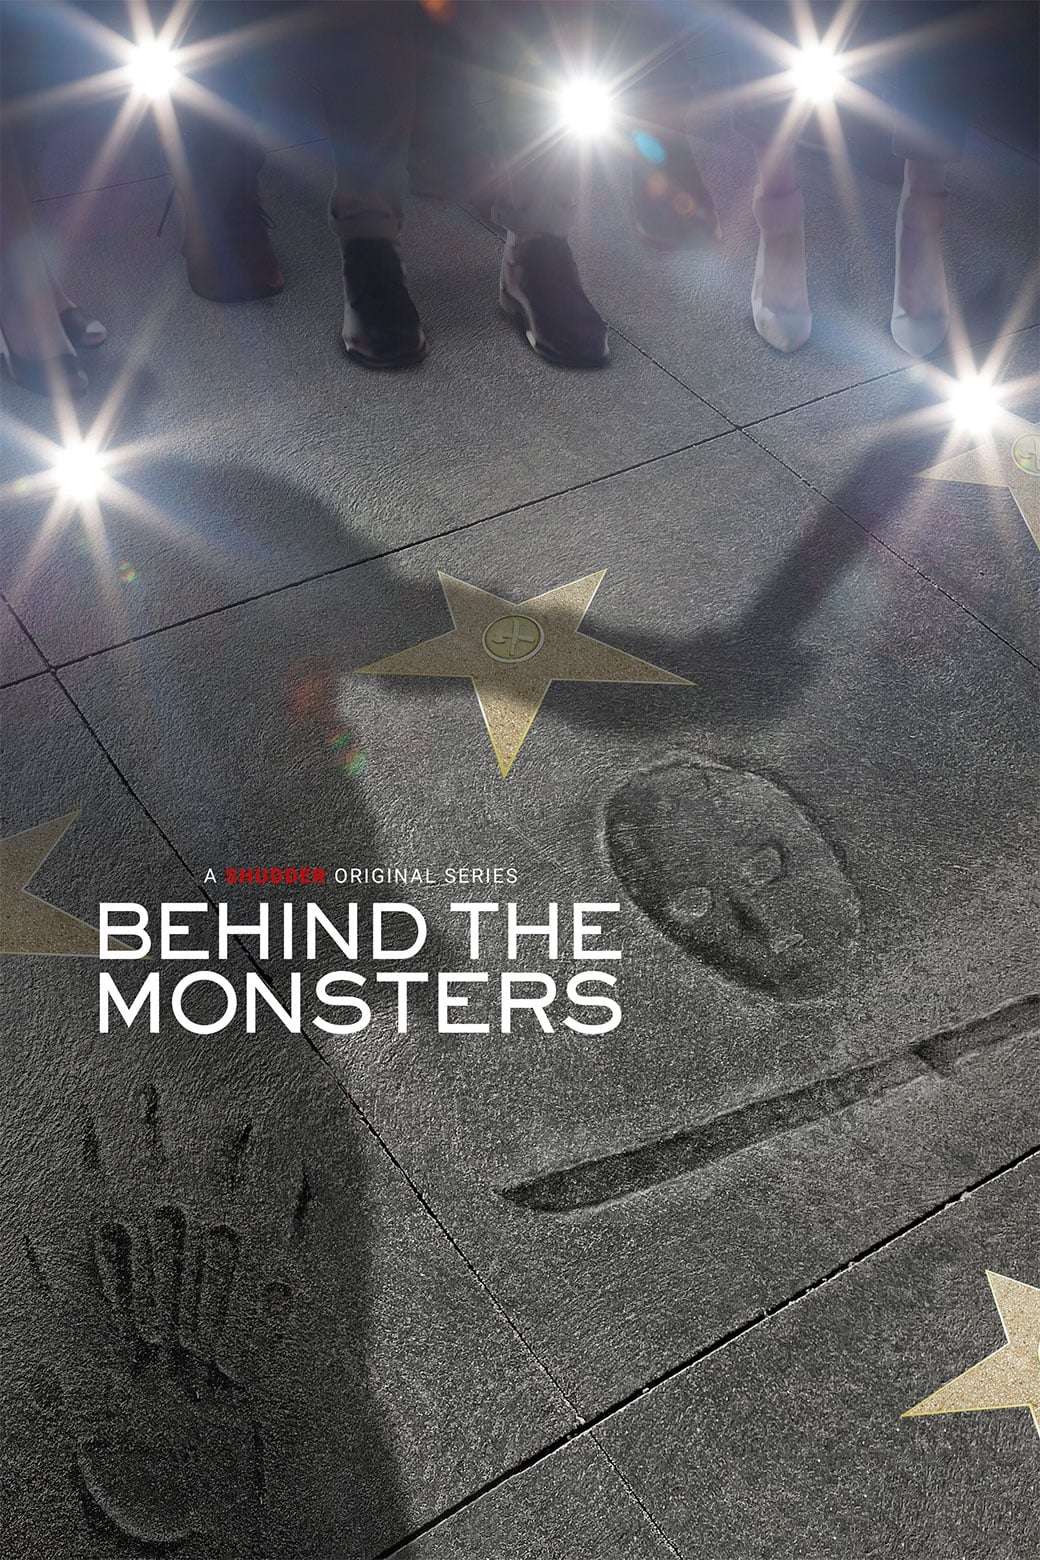 Behind the Monsters (2021)